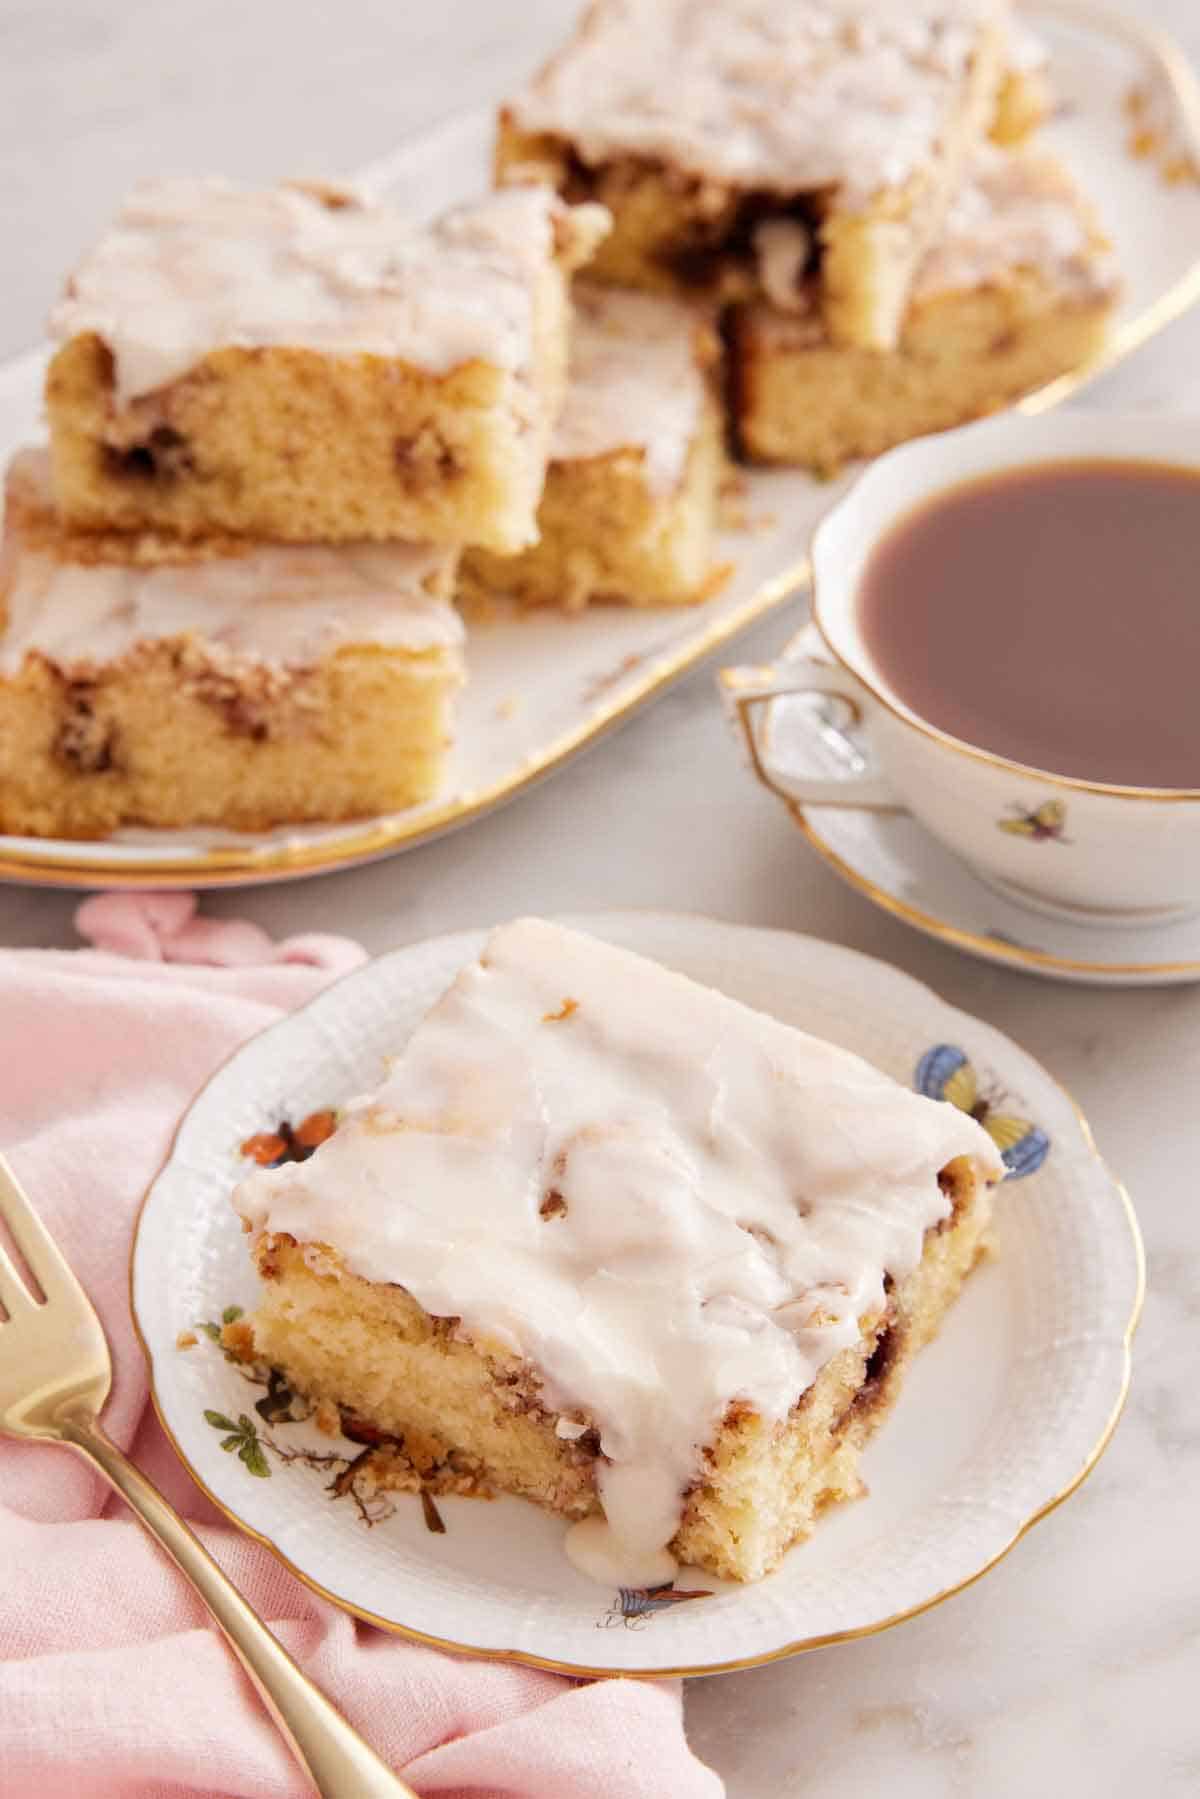 A plate with a slice of cinnamon roll cake with a mug of coffee and platter of cut cake in the background.